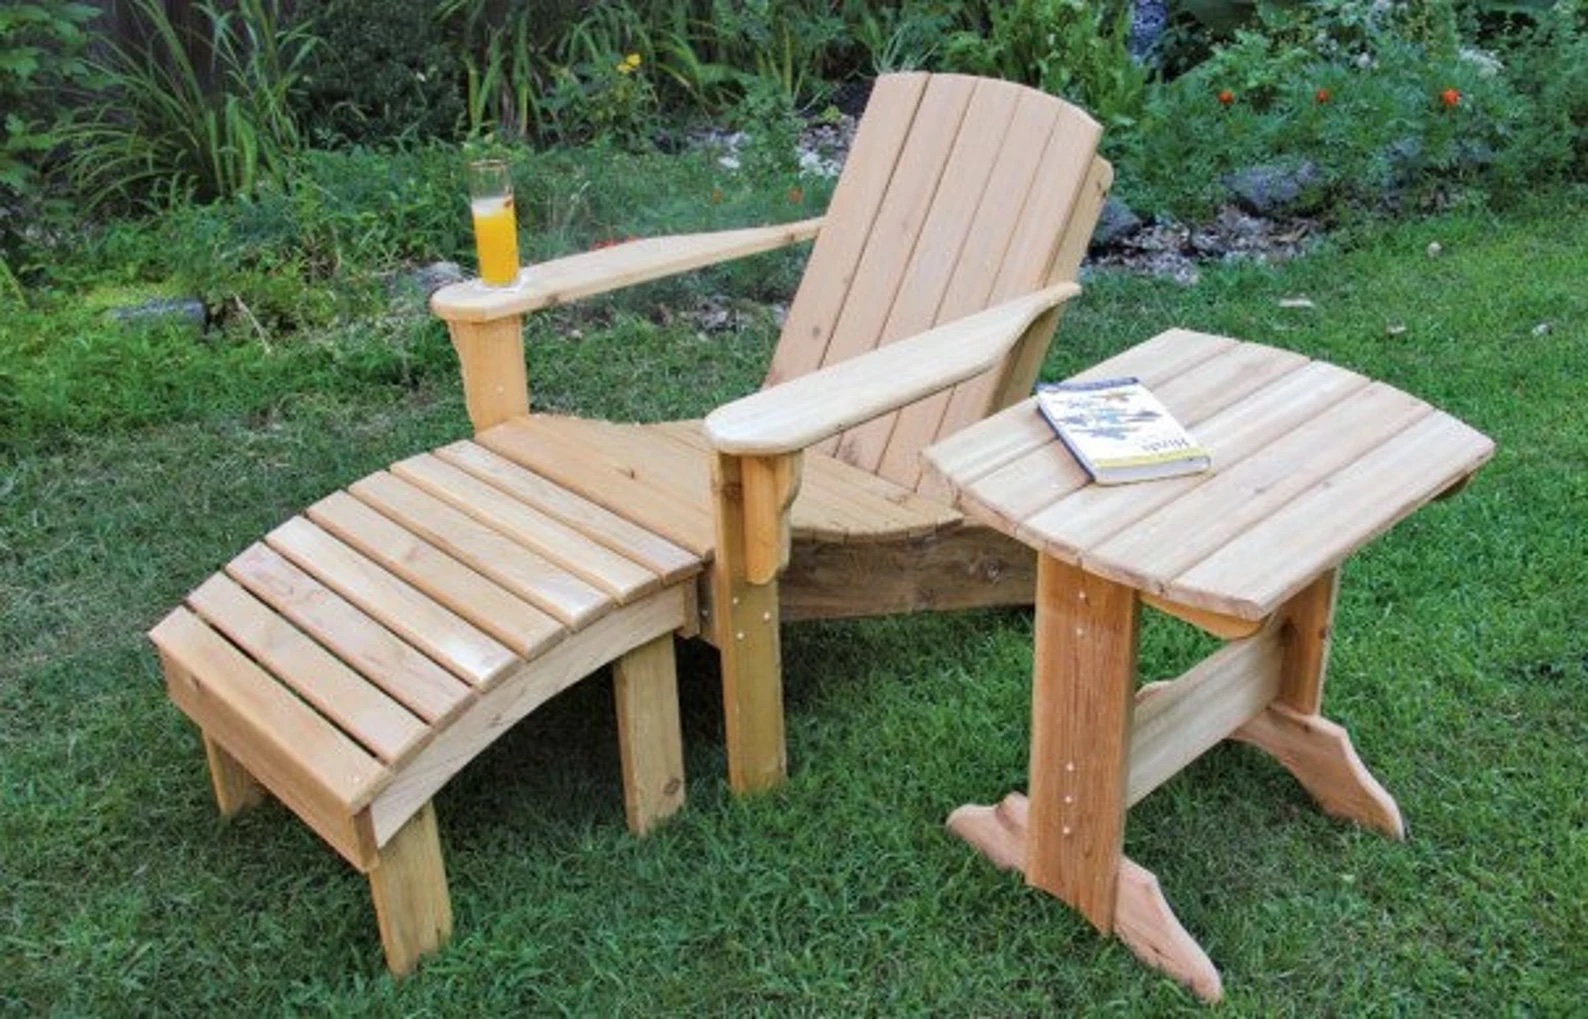 Wood adirondack chair with ottoman and side table